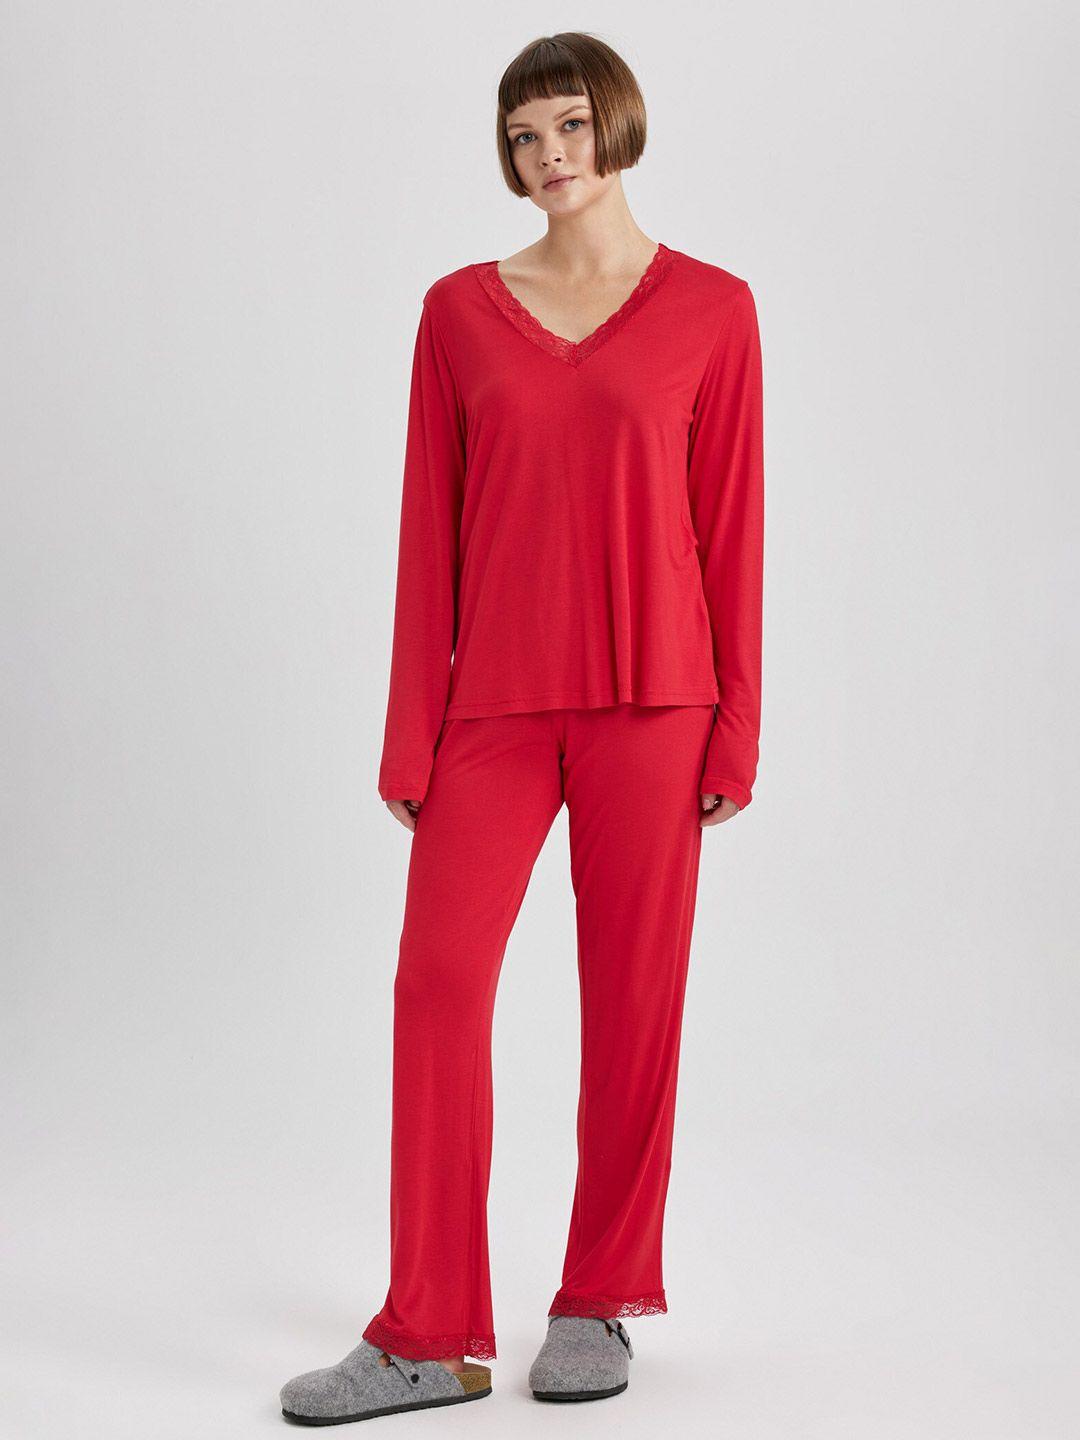 defacto lace detail v-neck top with lounge pants